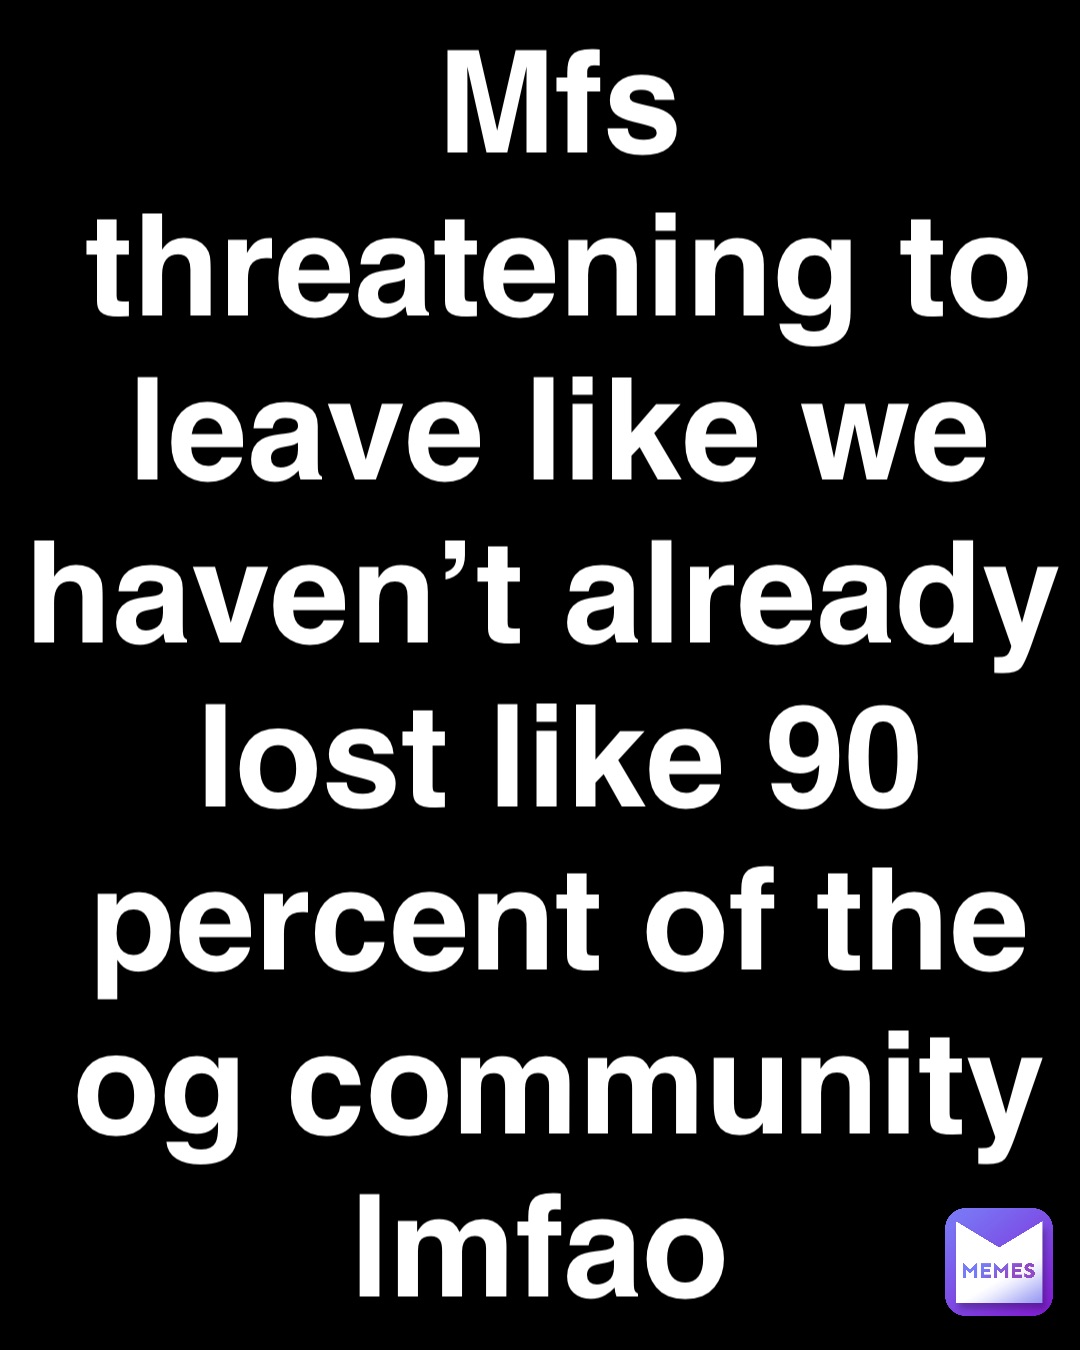 Double tap to edit Mfs threatening to leave like we haven’t already lost like 90 percent of the og community lmfao